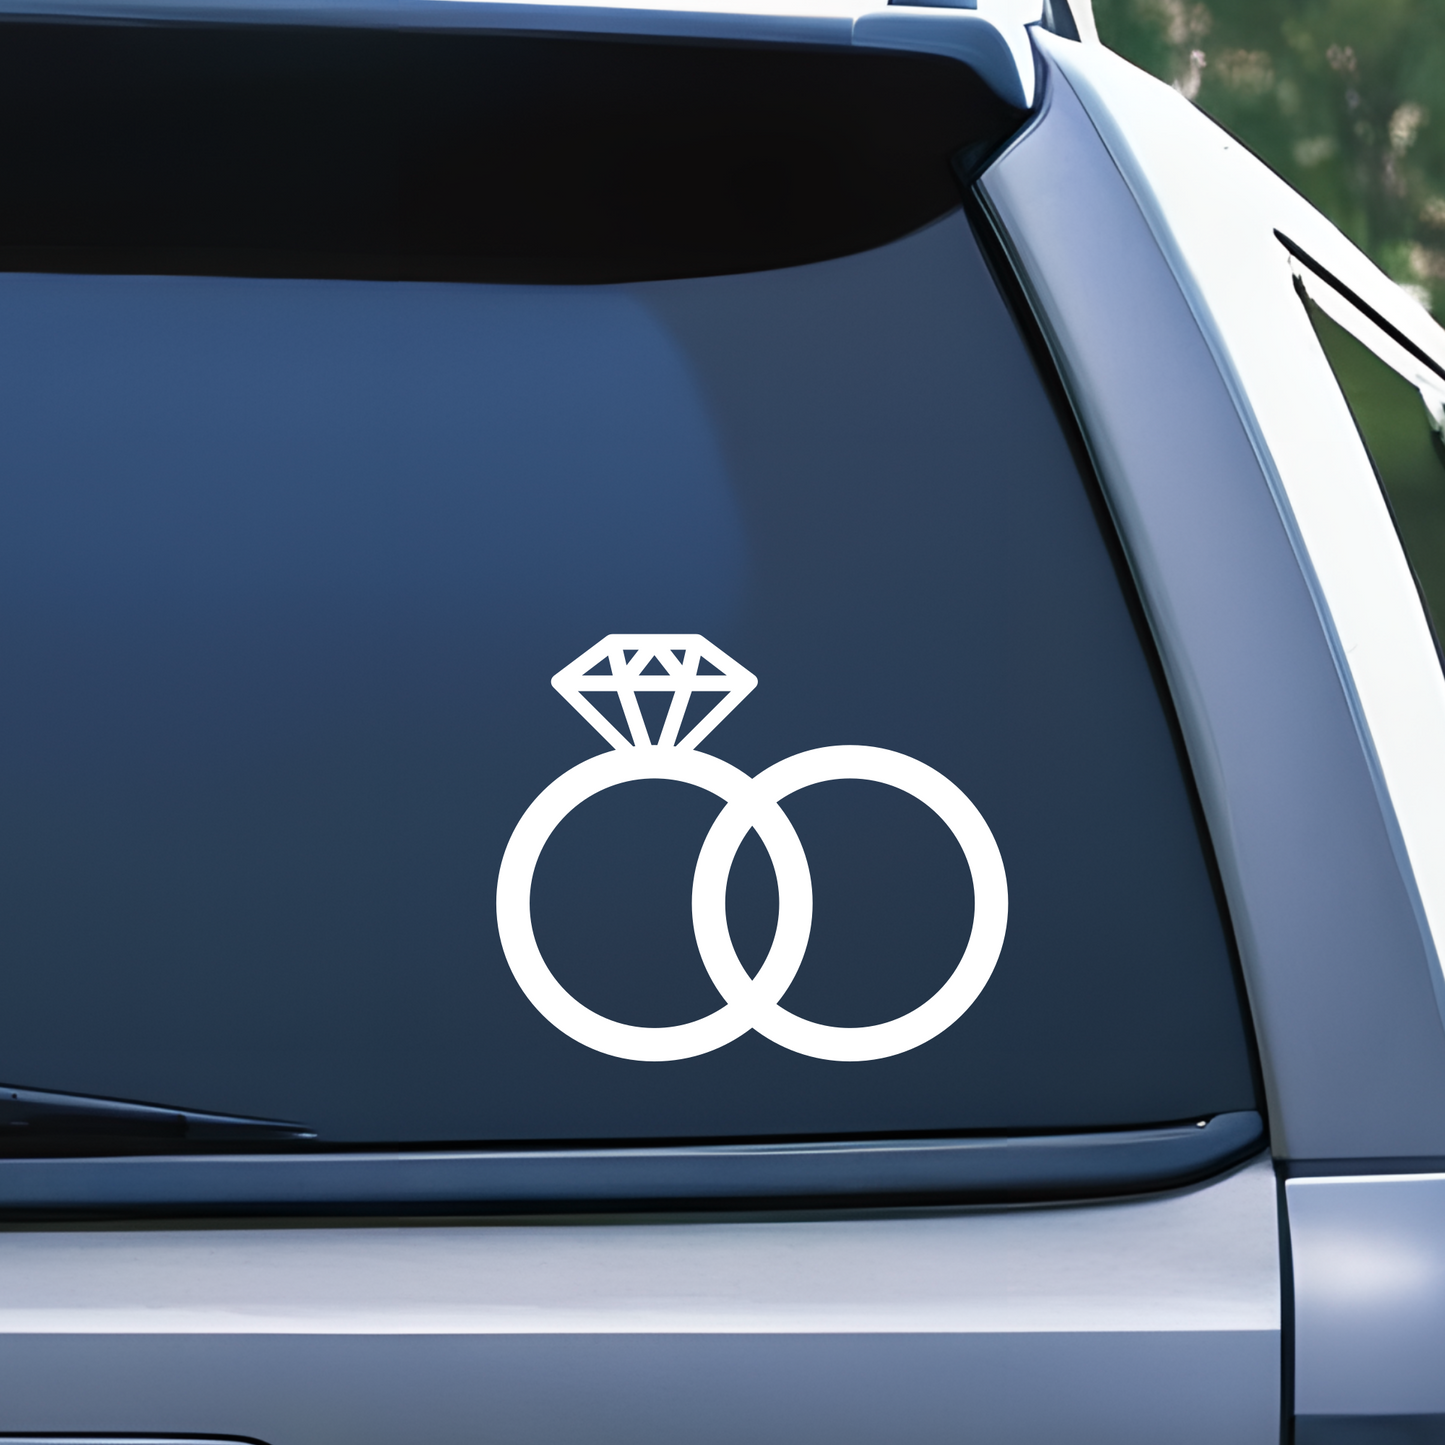 Wedding Rings Decal, Husband and Wife Rings, Wedding Decor Decal